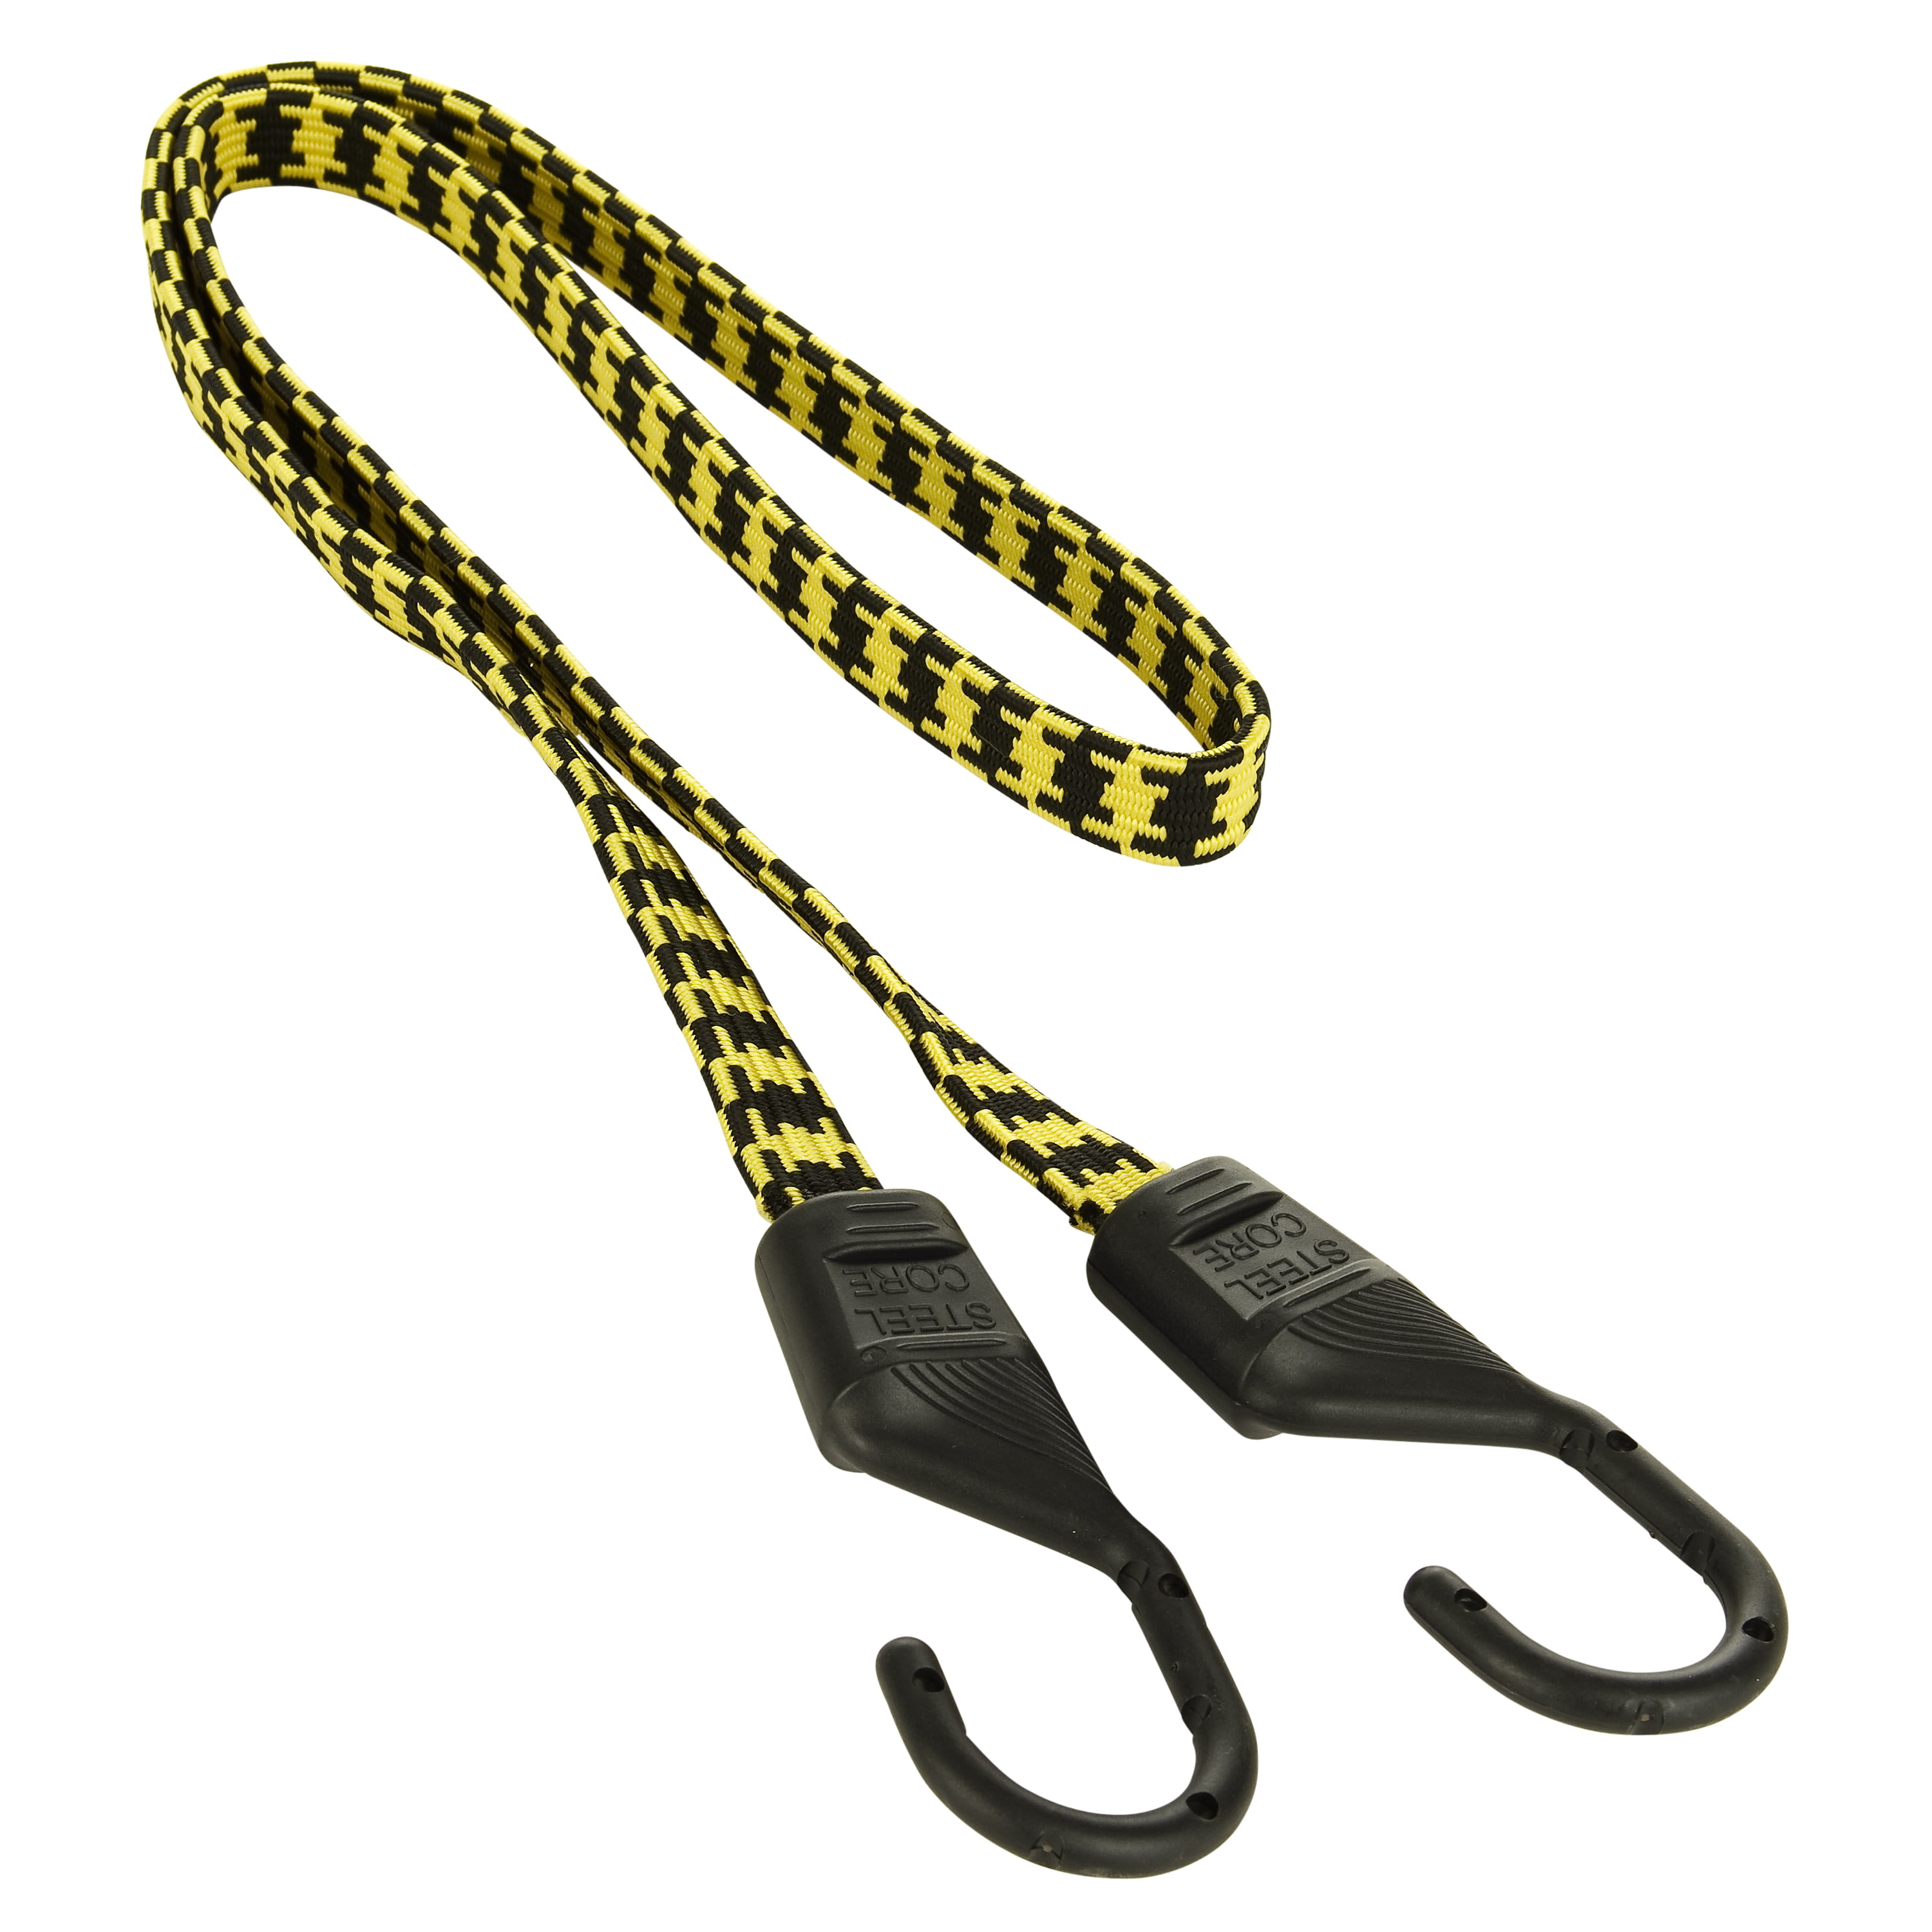 KNOTBONE ADJUSTABLE BUNGEE CORD - Cords, Ropes & Ties - Equipment